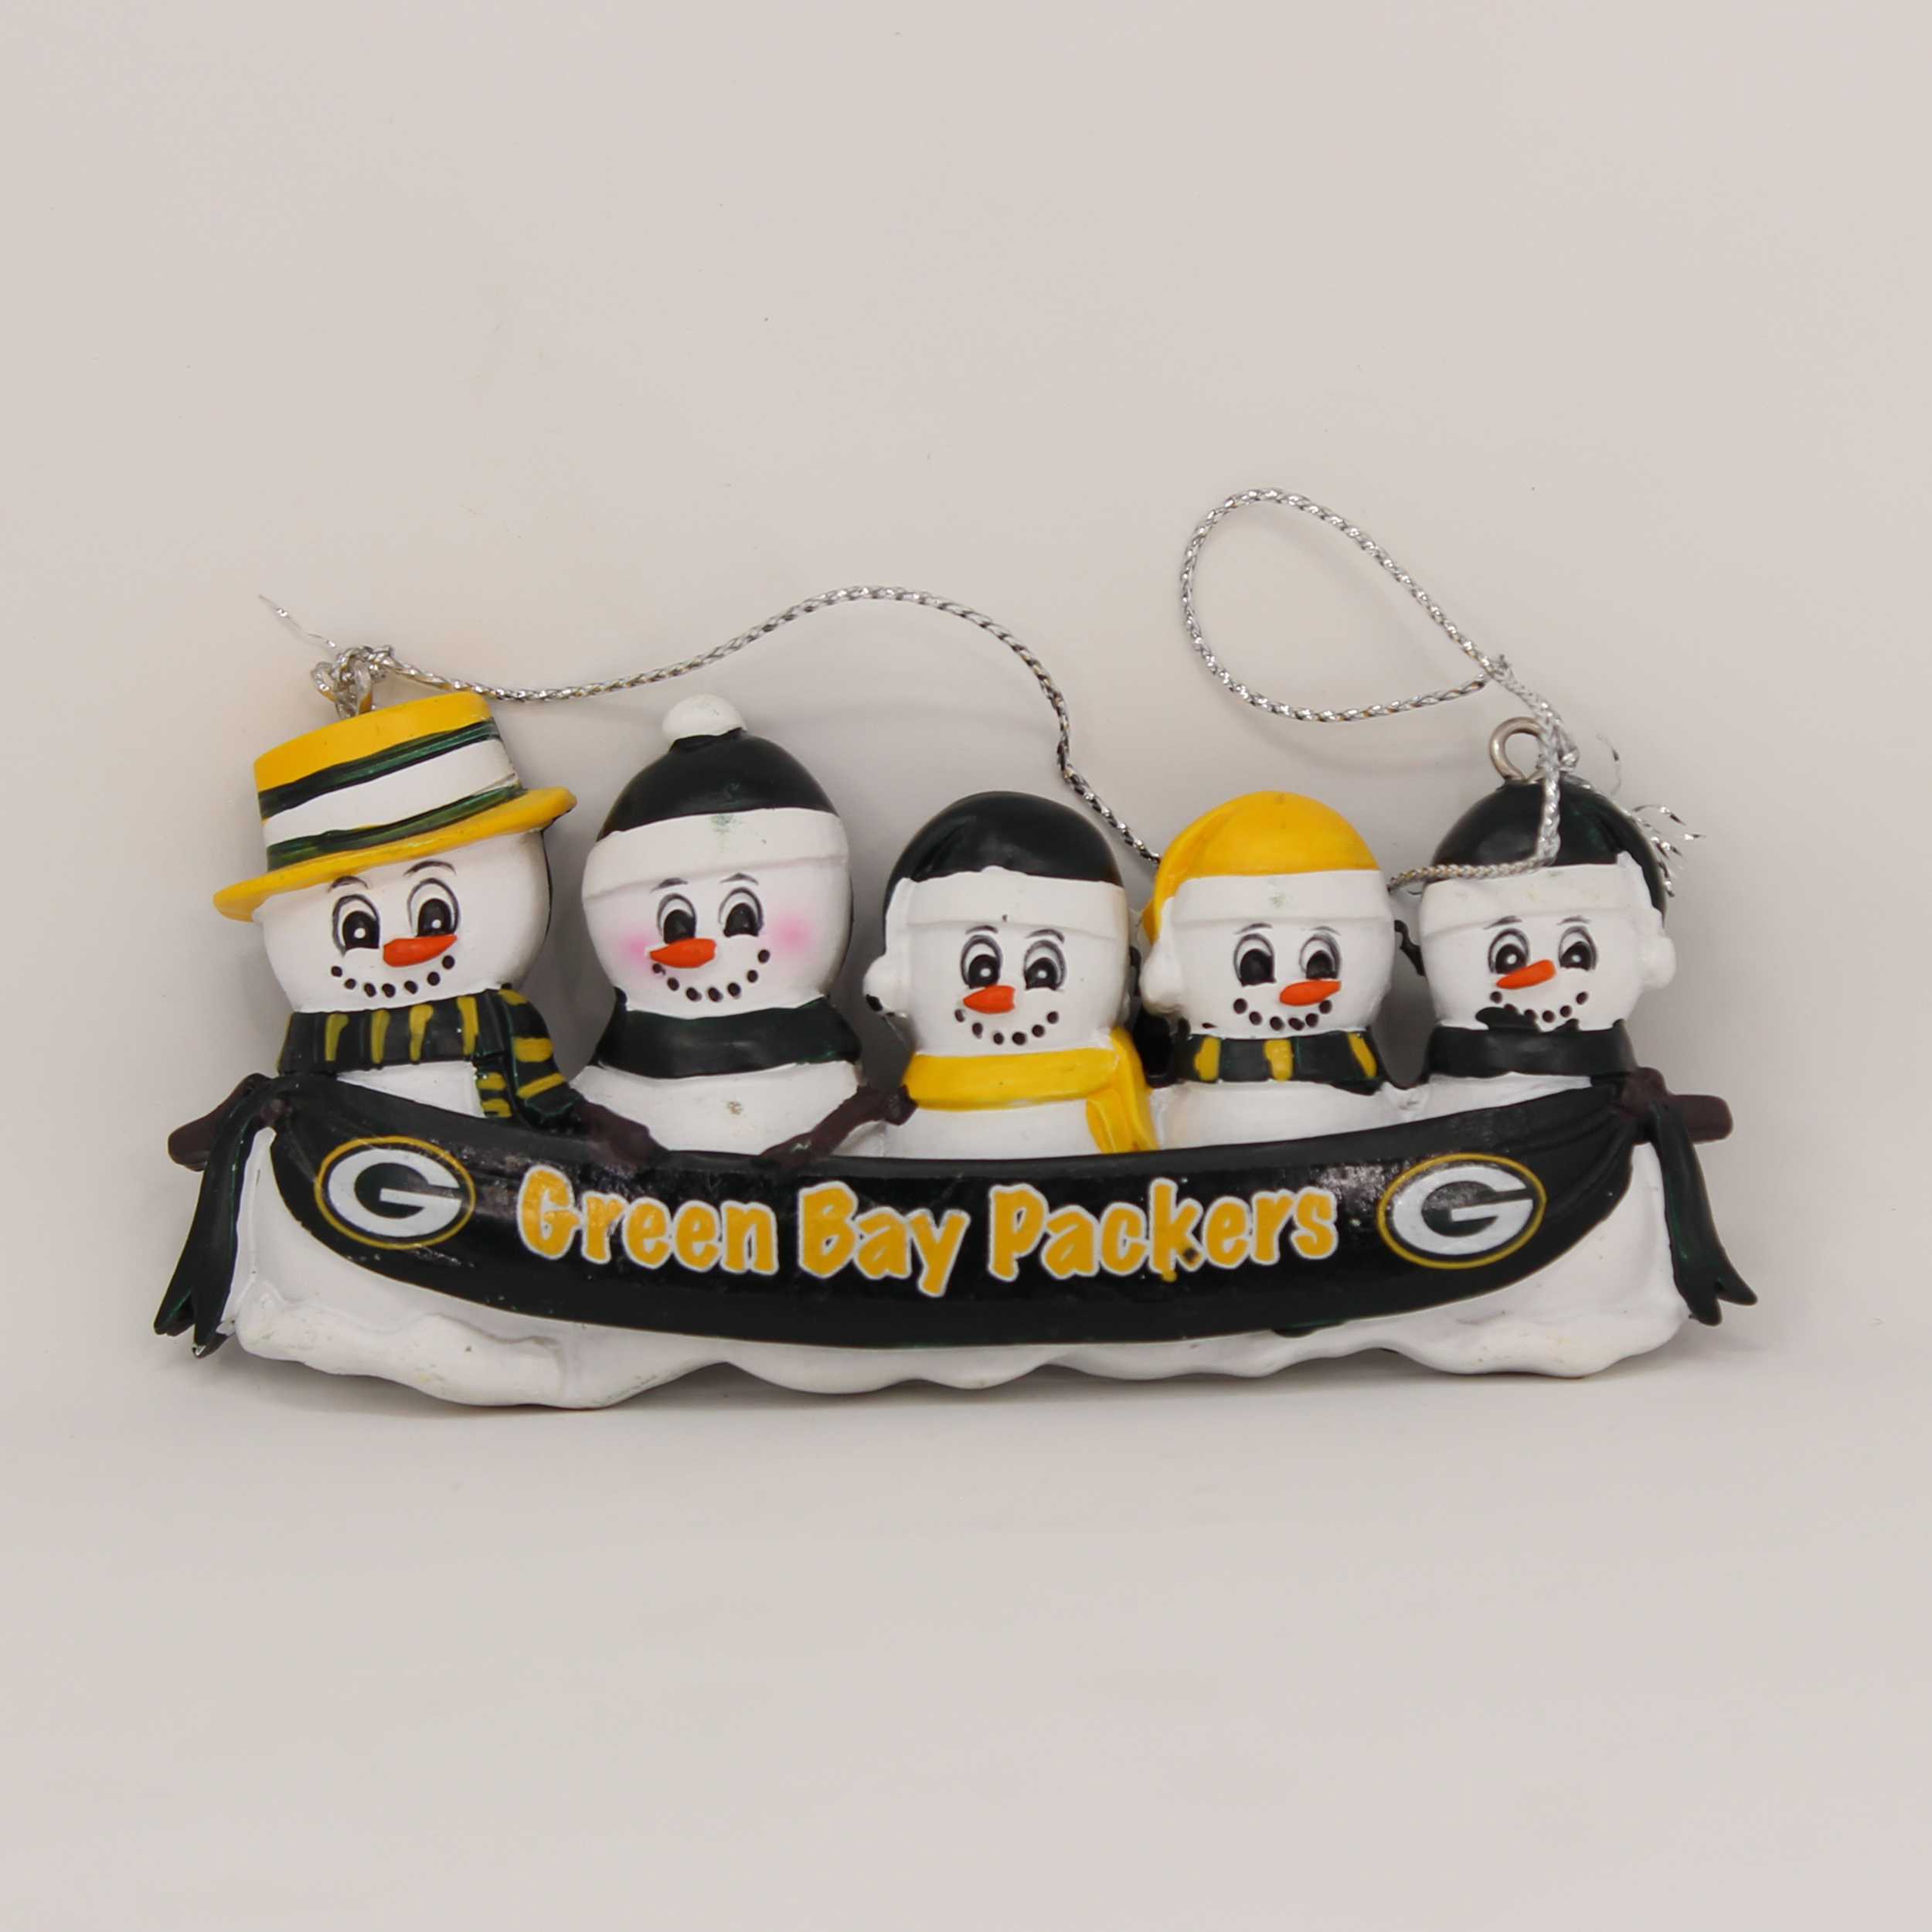 Personalized Family Ornament Green Bay Packers